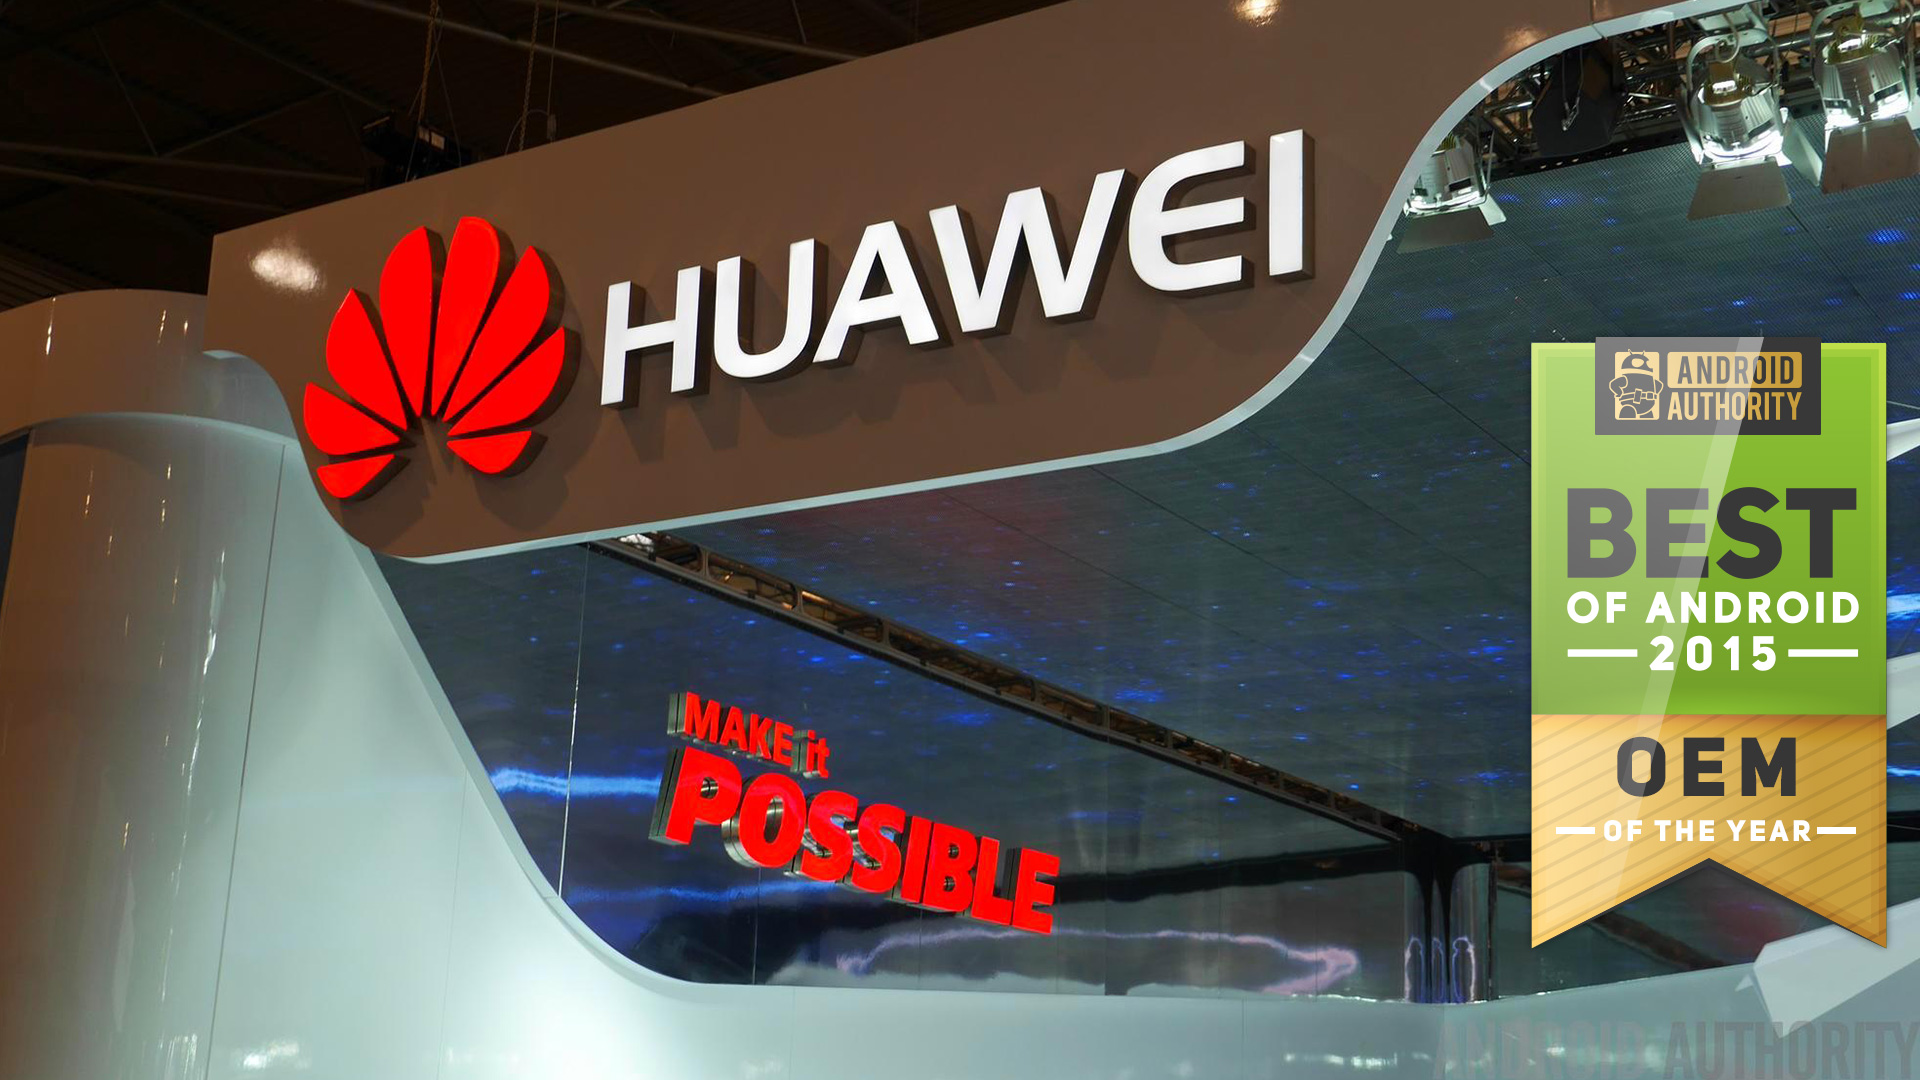 OEM of the year 2015 - HUAWEI